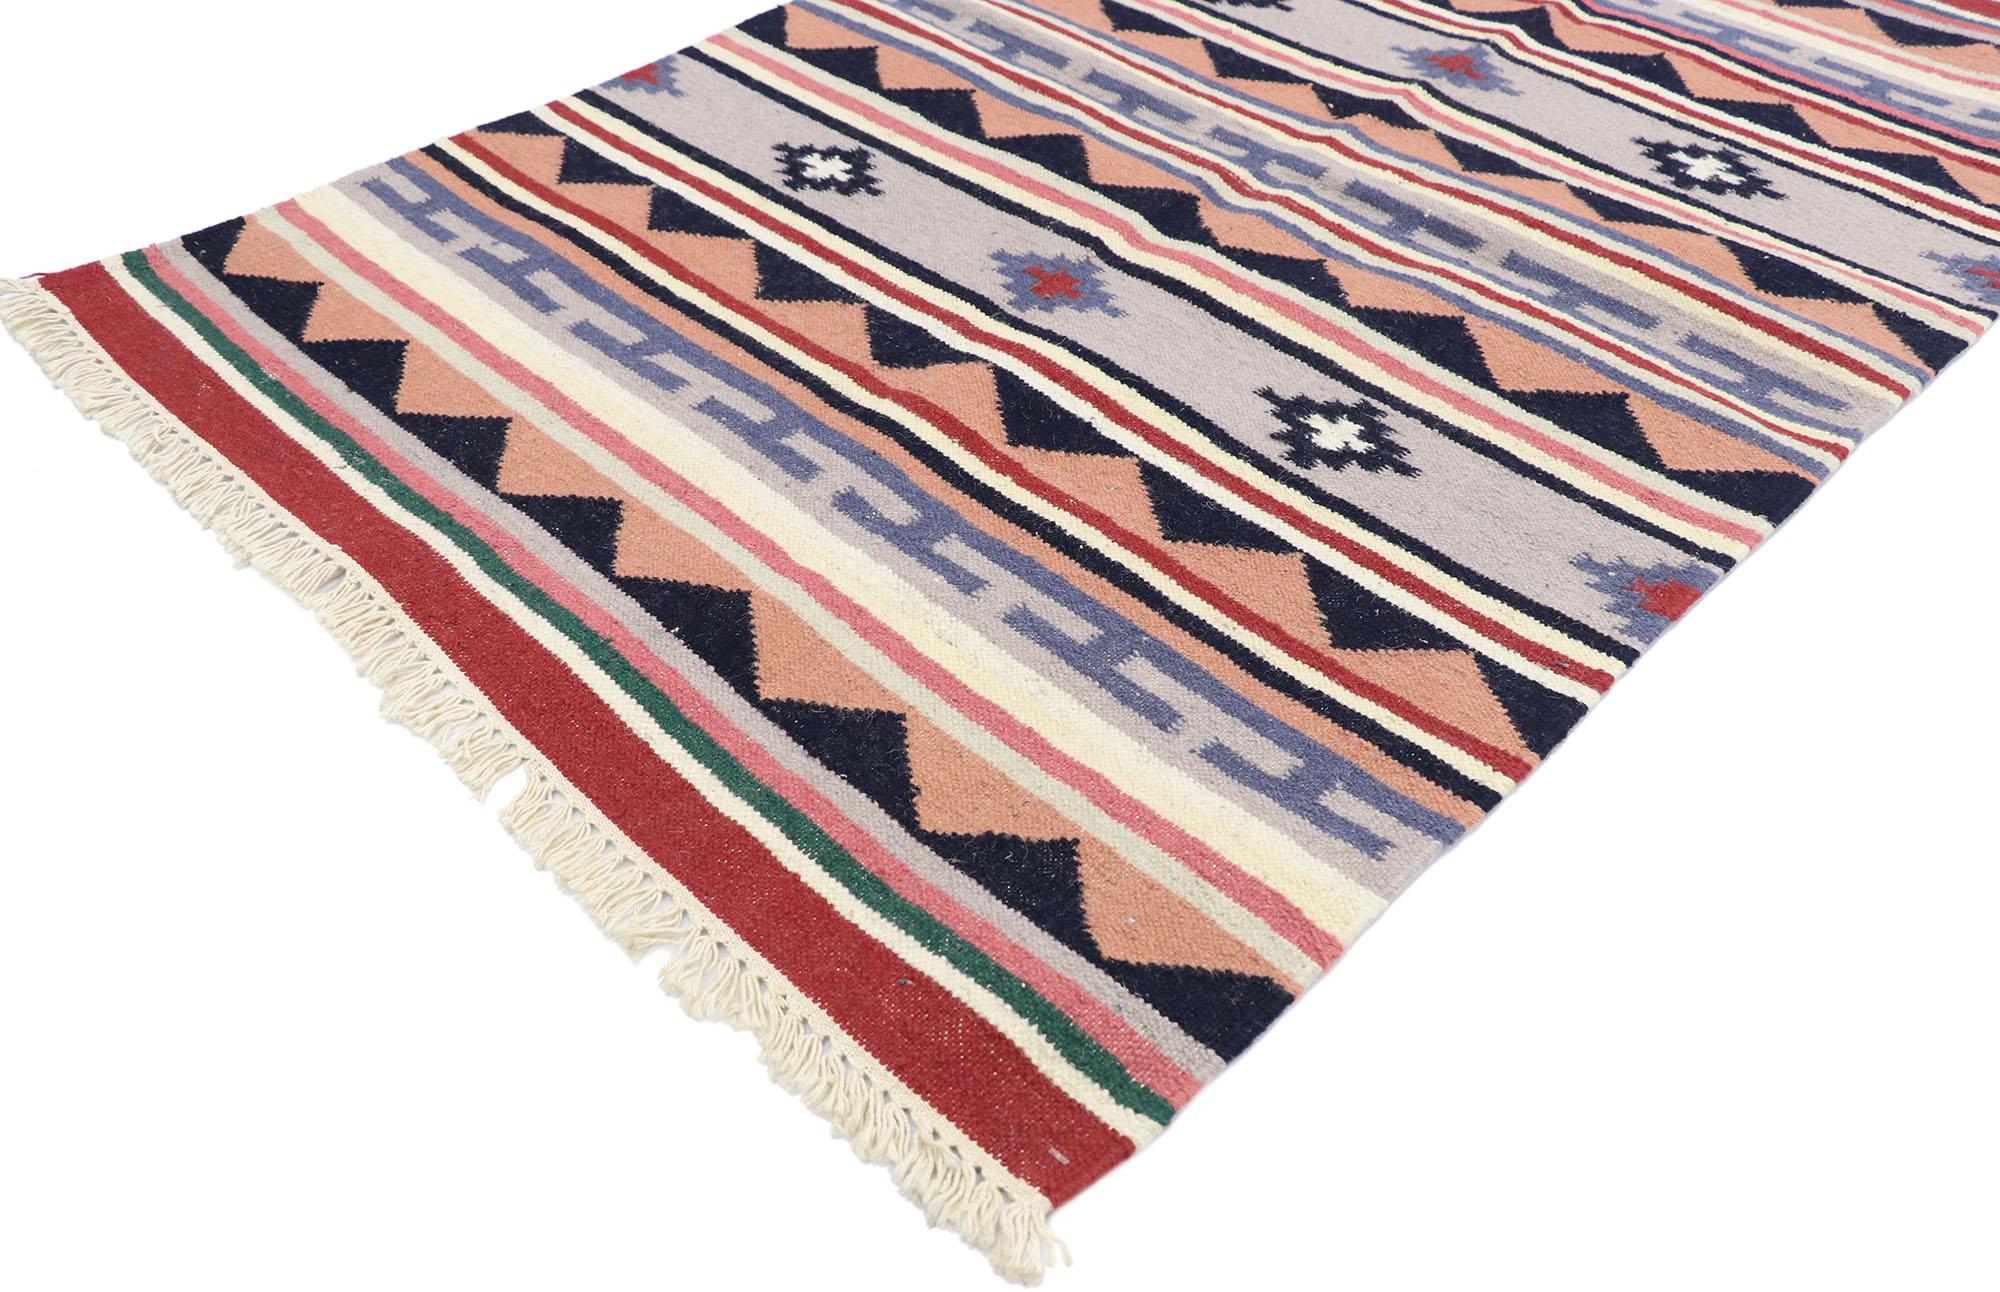 77836 vintage Persian Shiraz Kilim rug with Boho Chic Tribal style 03'02 x 04'11. Full of tiny details and a bold expressive design combined with vibrant colors and tribal style, this hand-woven wool vintage Persian Shiraz kilim rug is a captivating